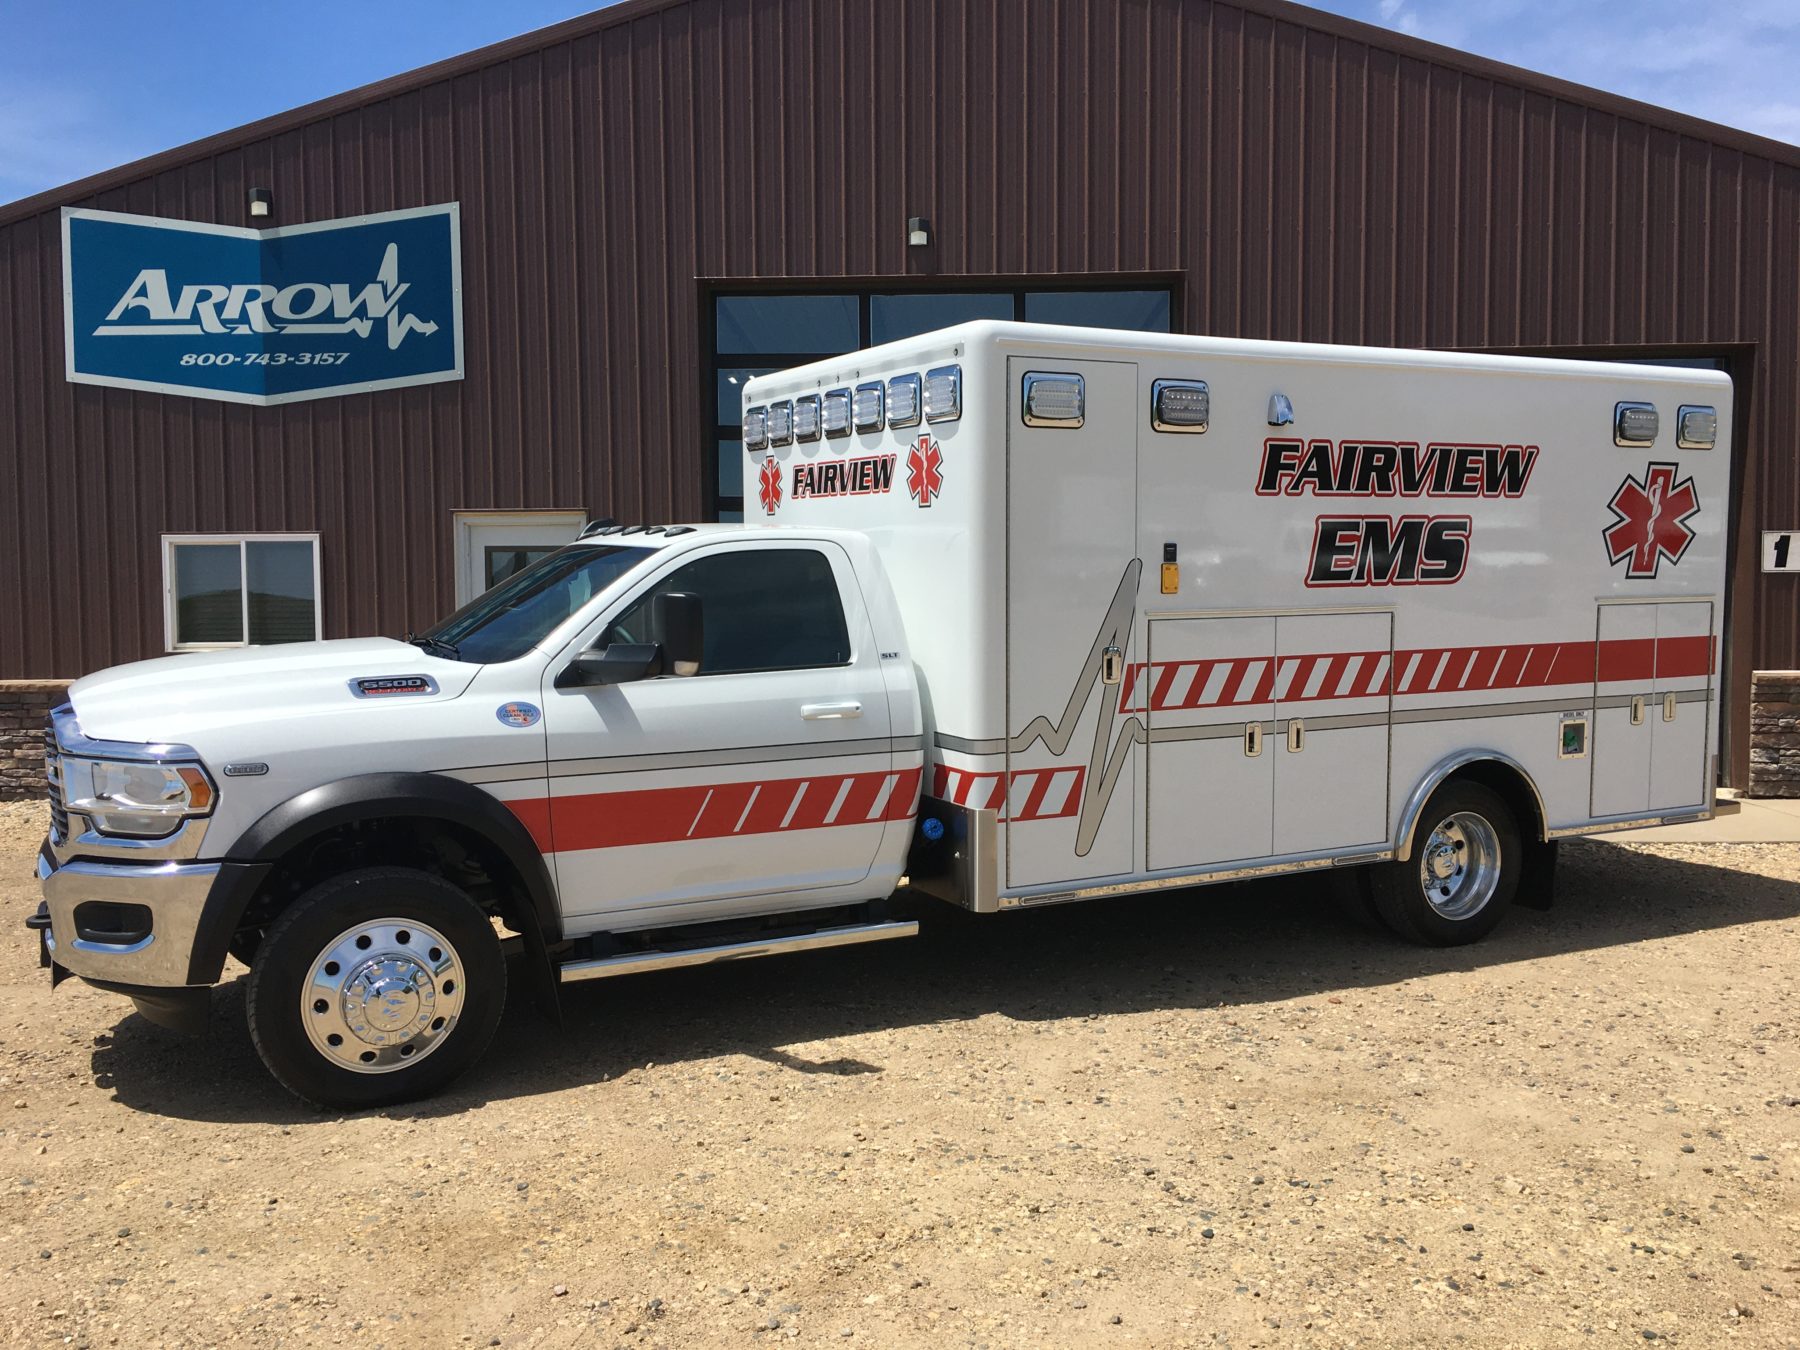 2021 Ram 5500 4x4 Heavy Duty Ambulance For Sale – Picture 2